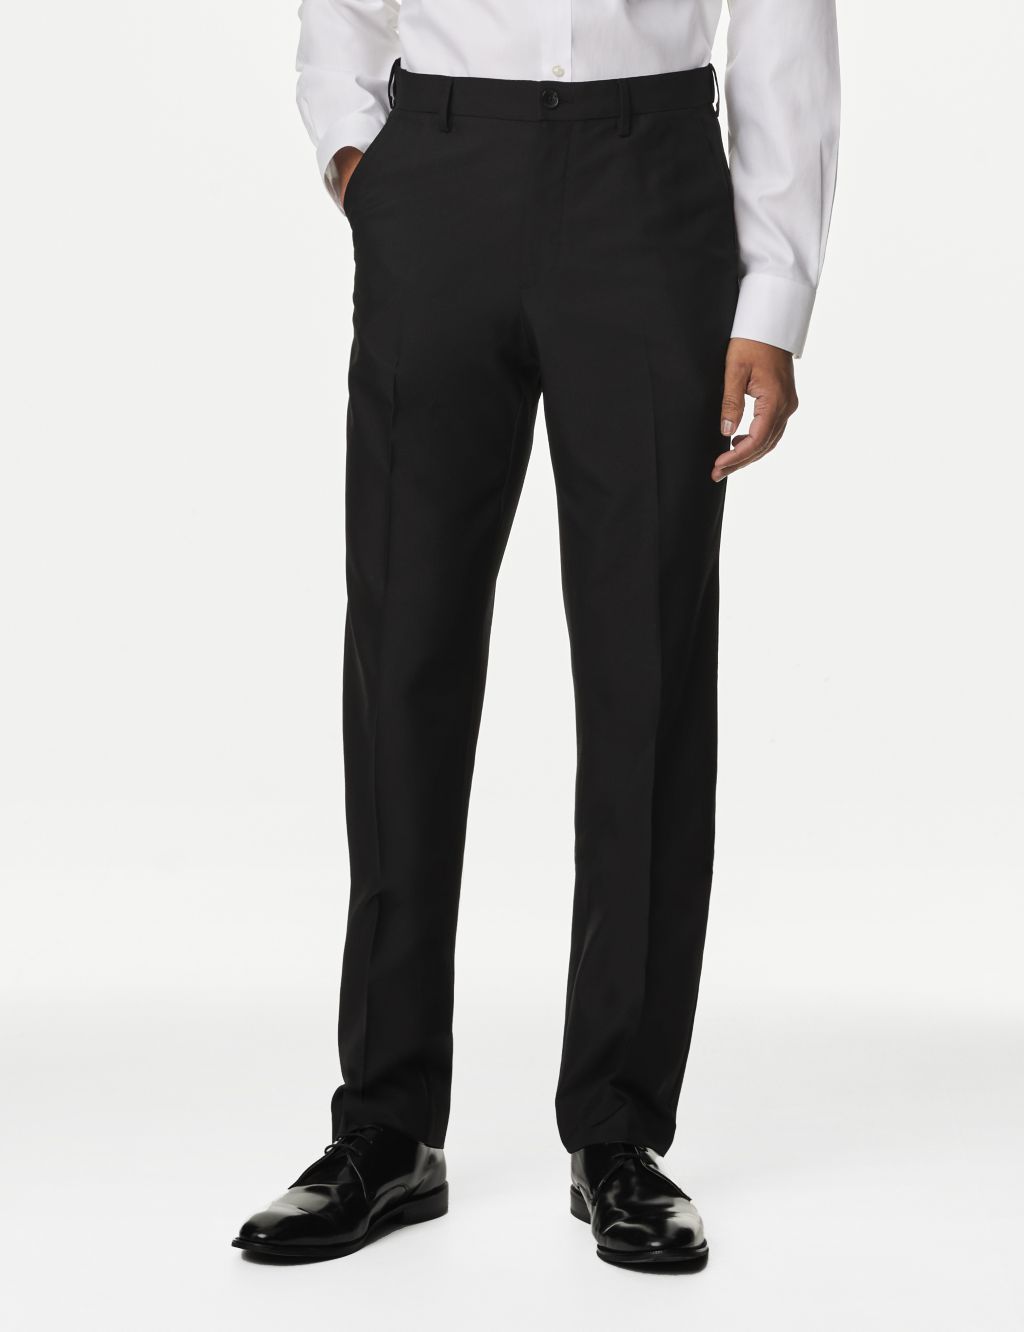 Regular Fit Trouser with Active Waist image 1